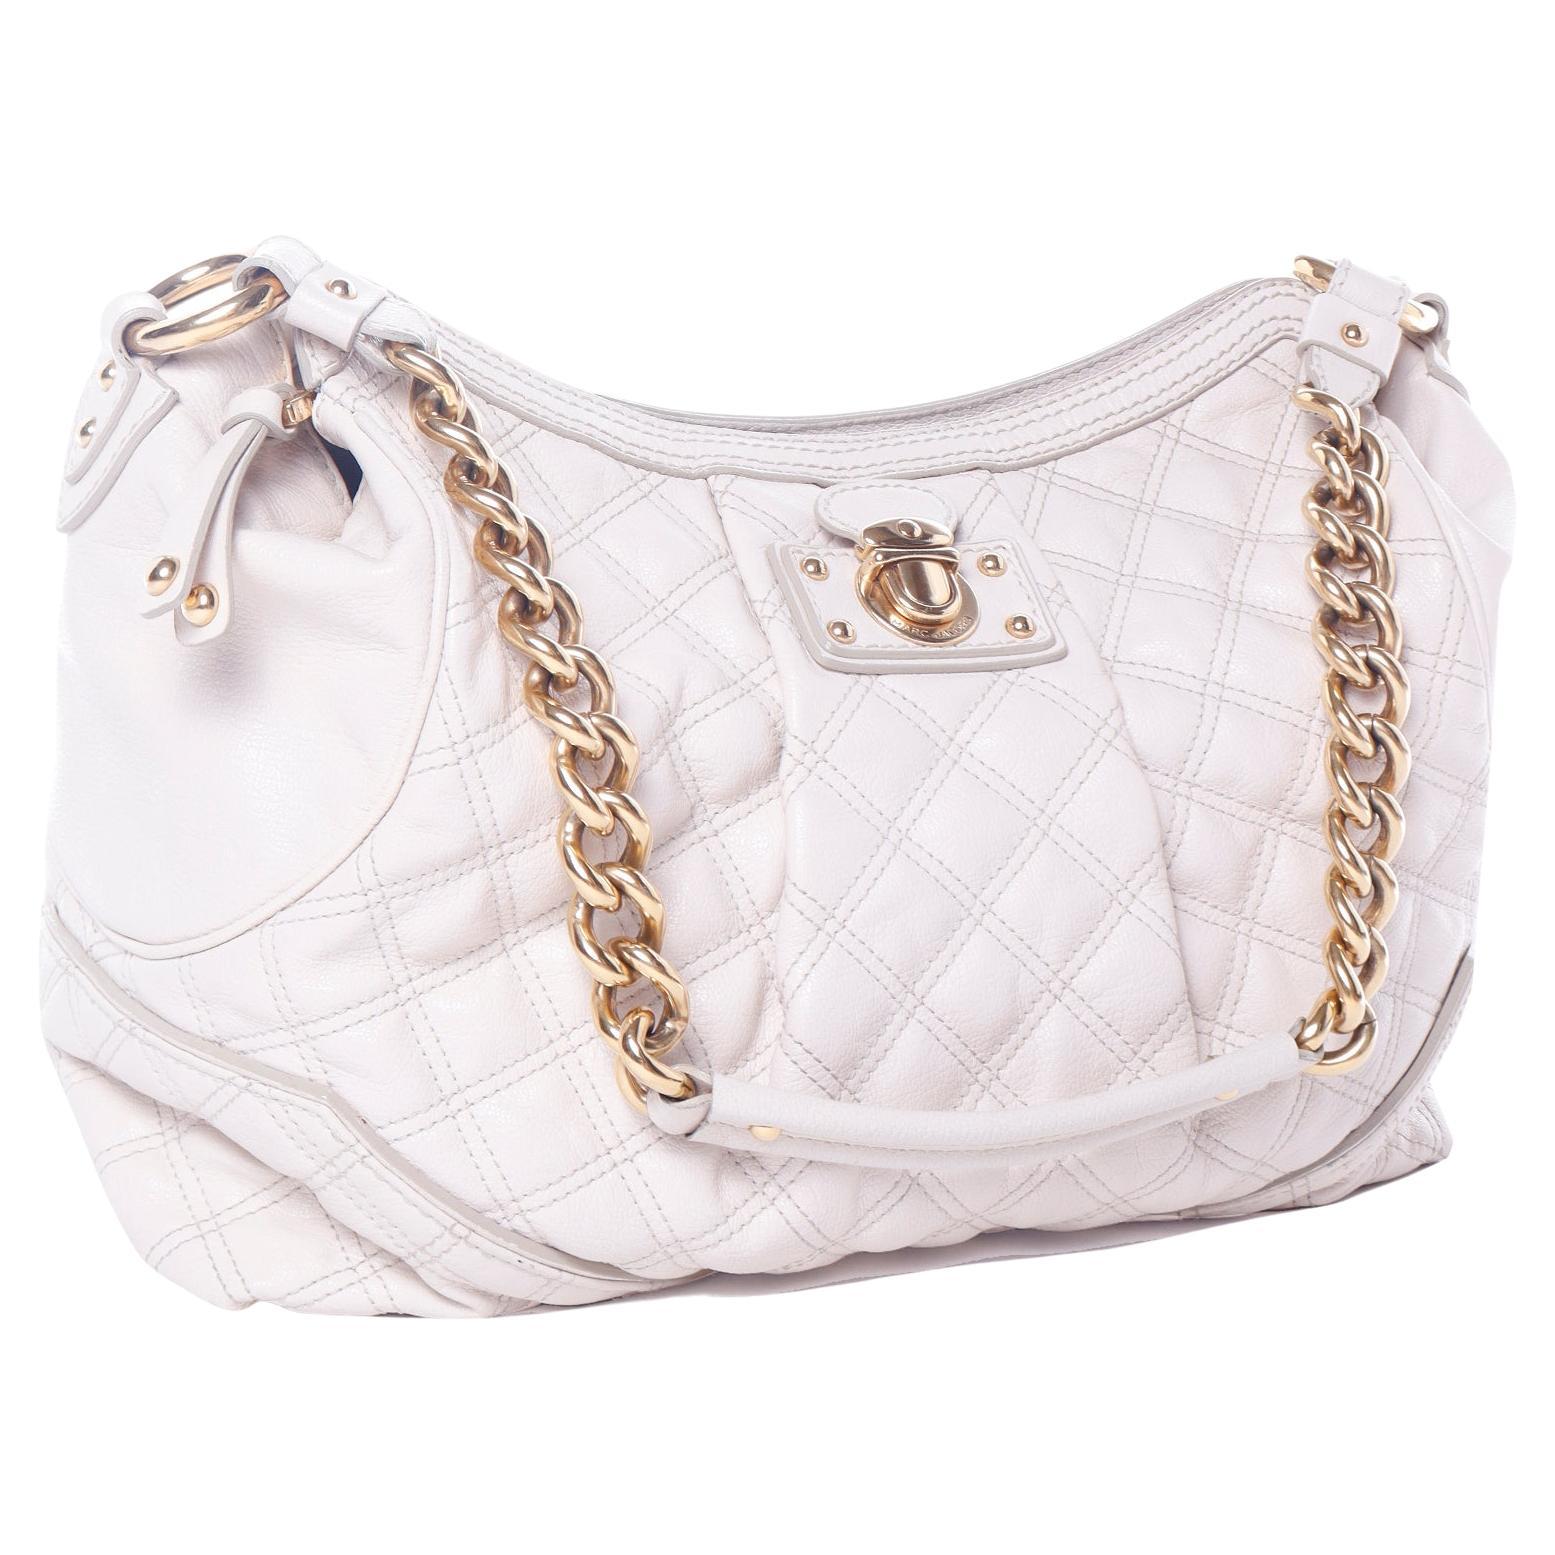 This Marc Jacobs bone quilted leather handbag has many of the designer's signature bag elements. The bag has a monogrammed zipper pull and monogrammed faux clasp hardware on the front of the bag. This variation on the hobo bag has a top zipper and a